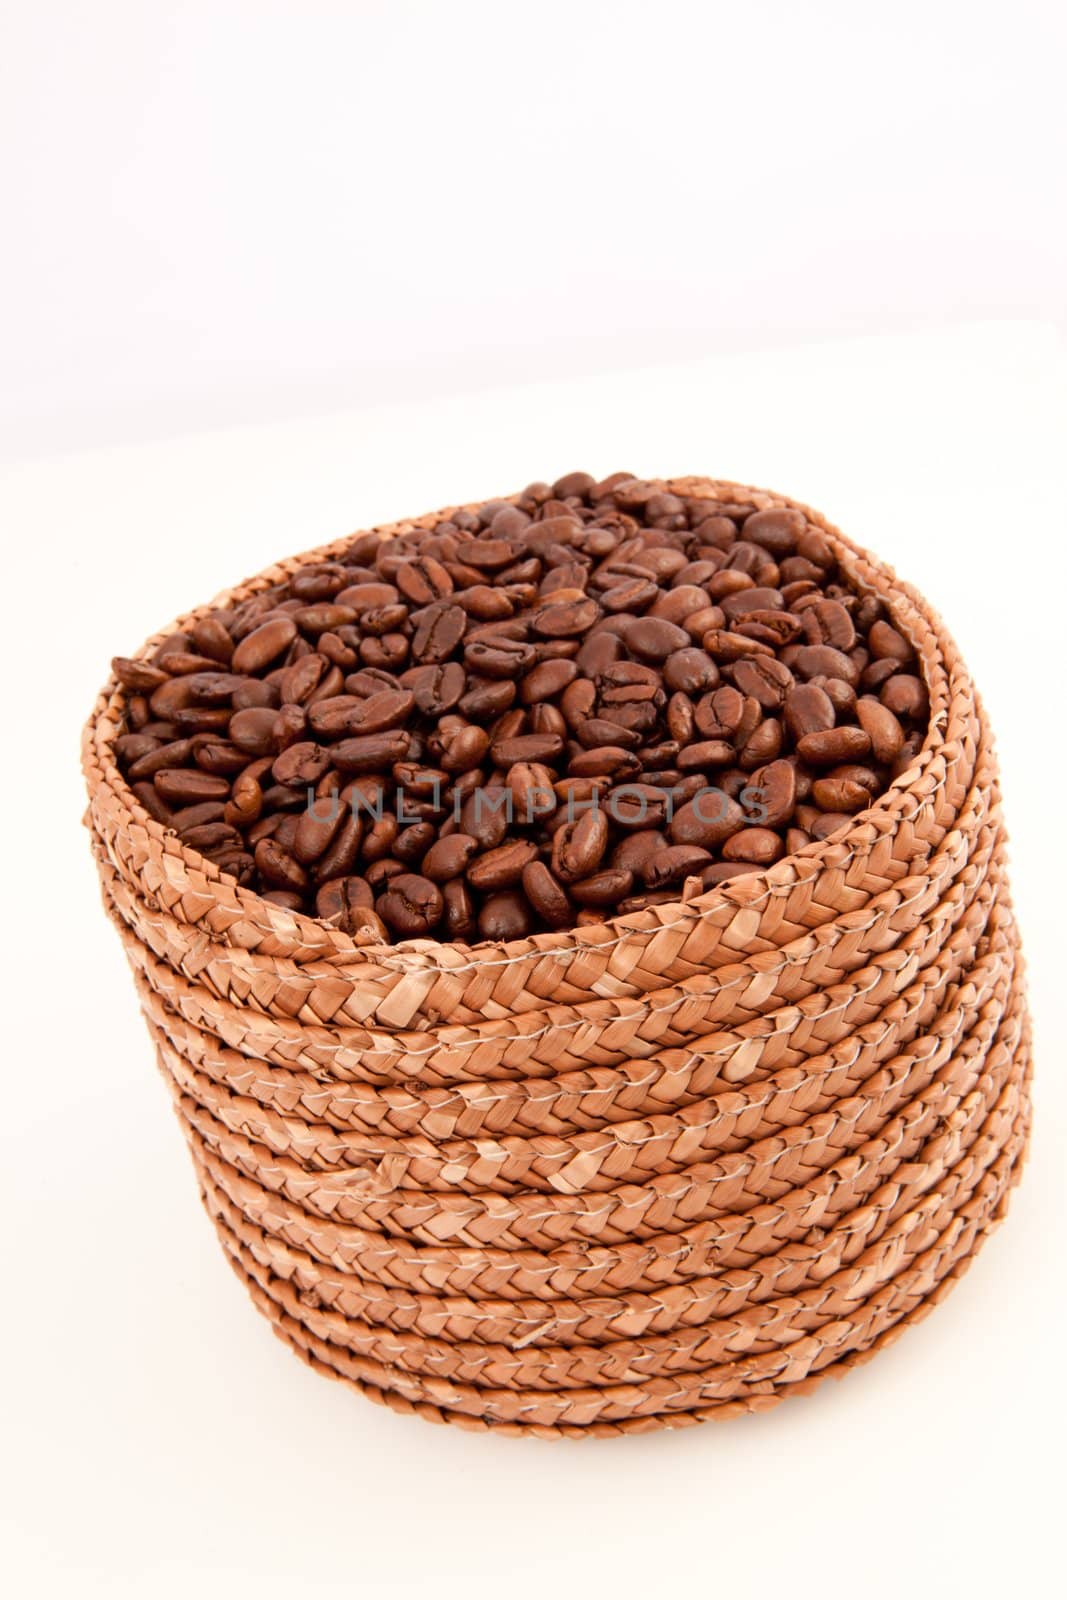 Close up of a basket full of coffee seeds against a white background